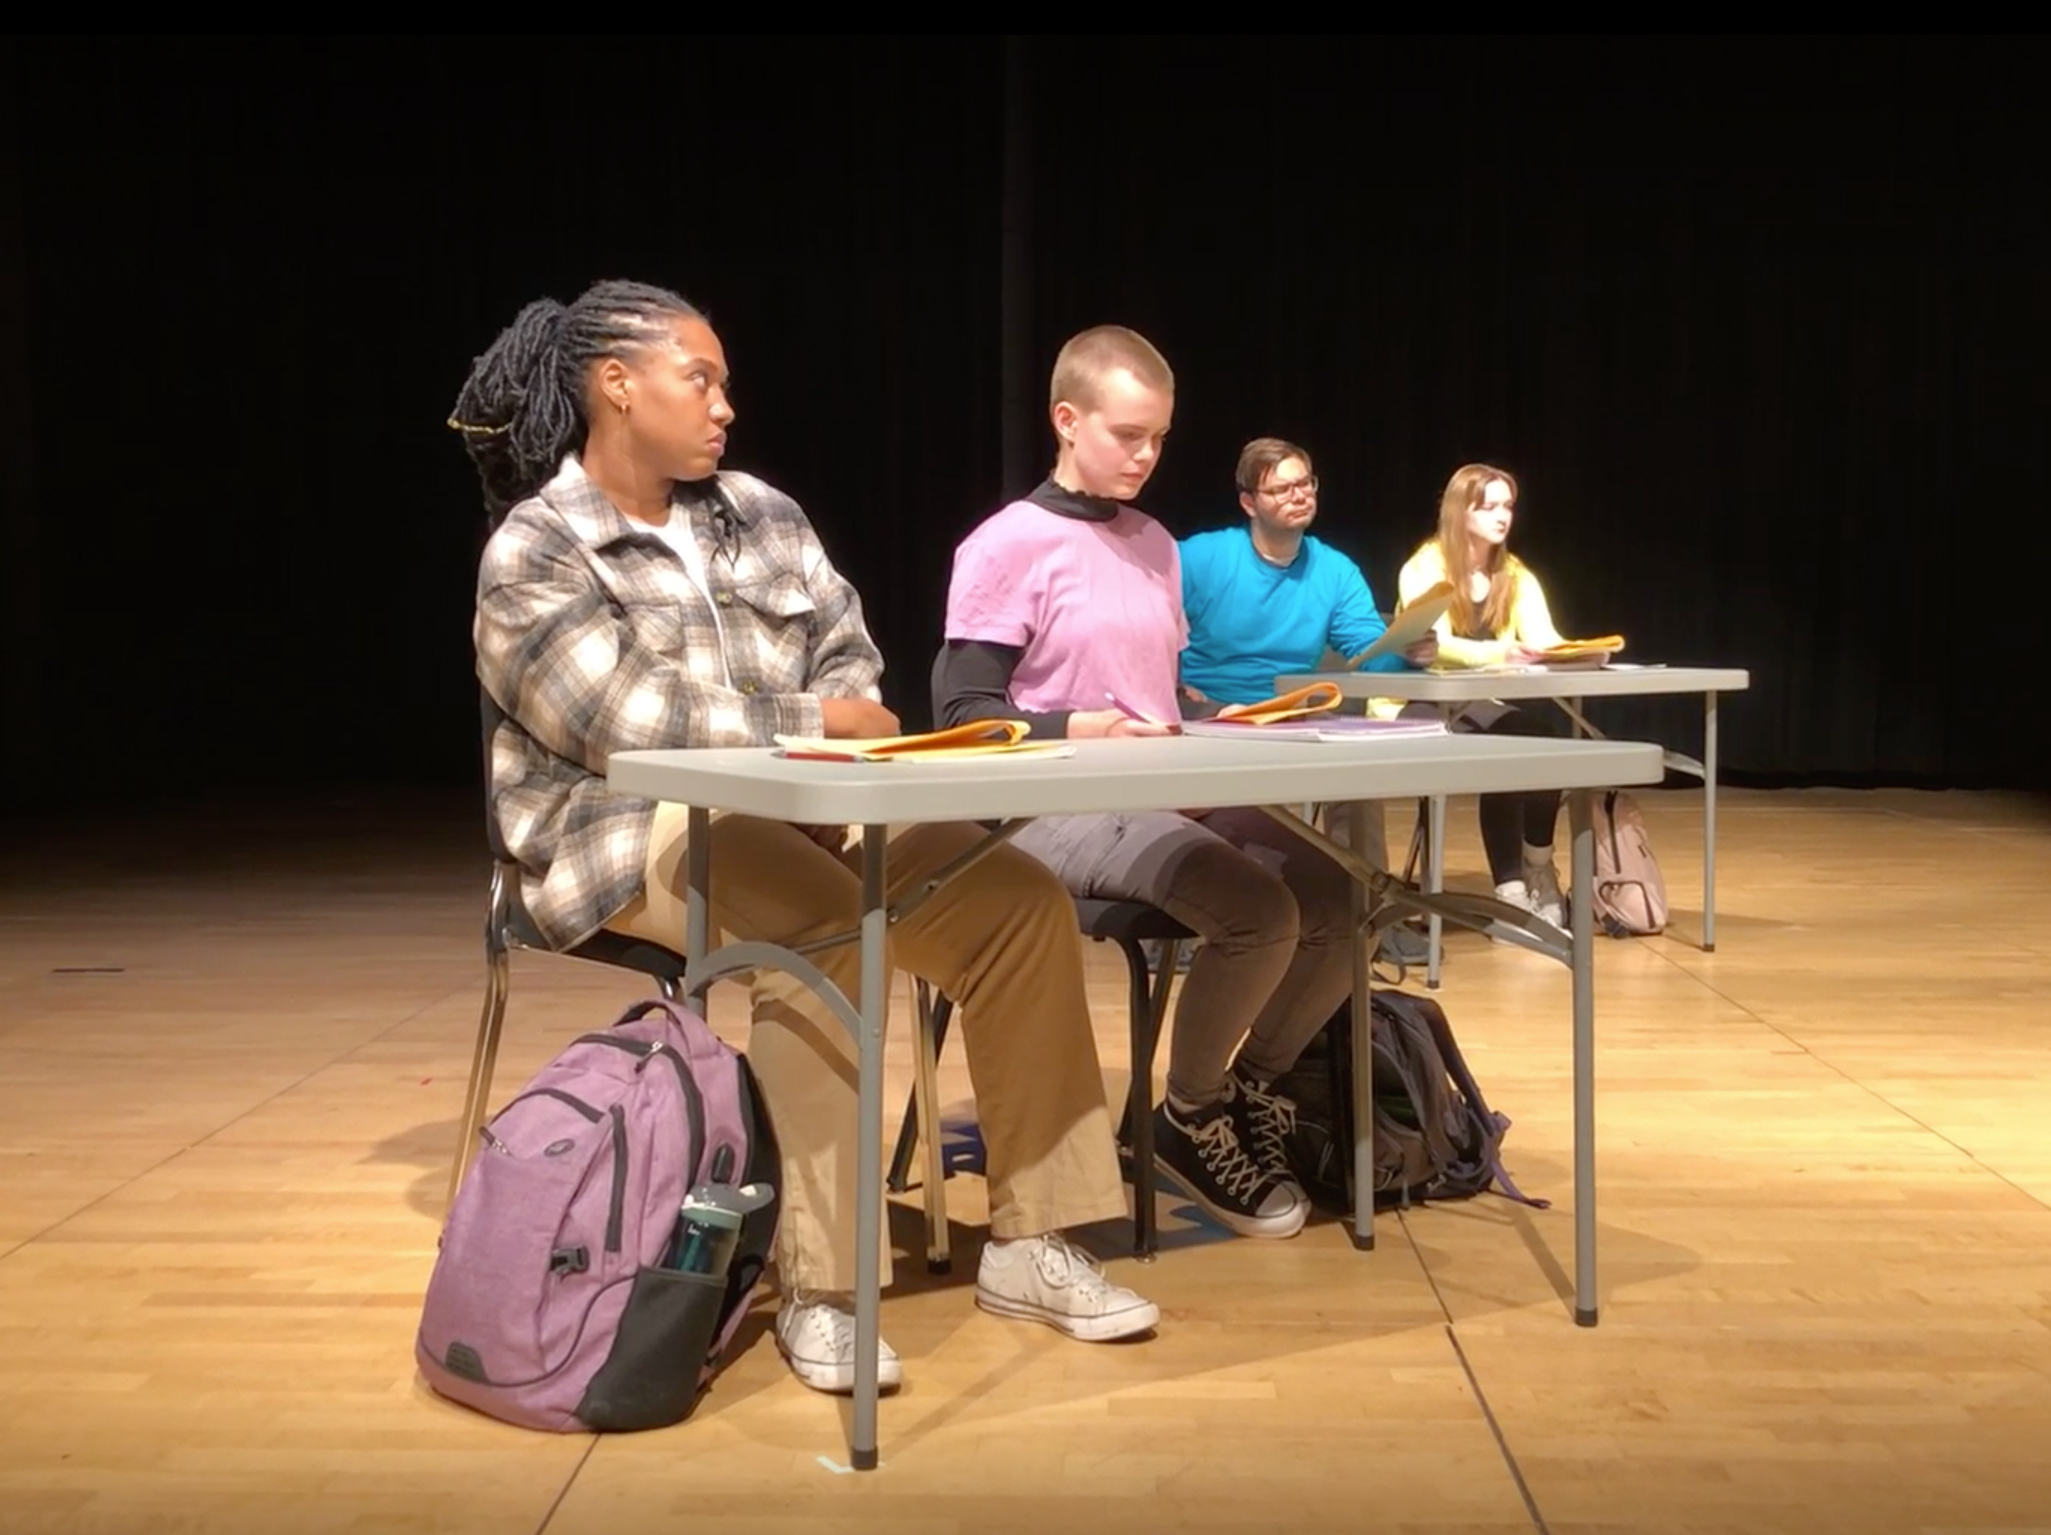 Main character Olamina (left) sits in a modern day classroom, portraying to the audience how Black students are treated.